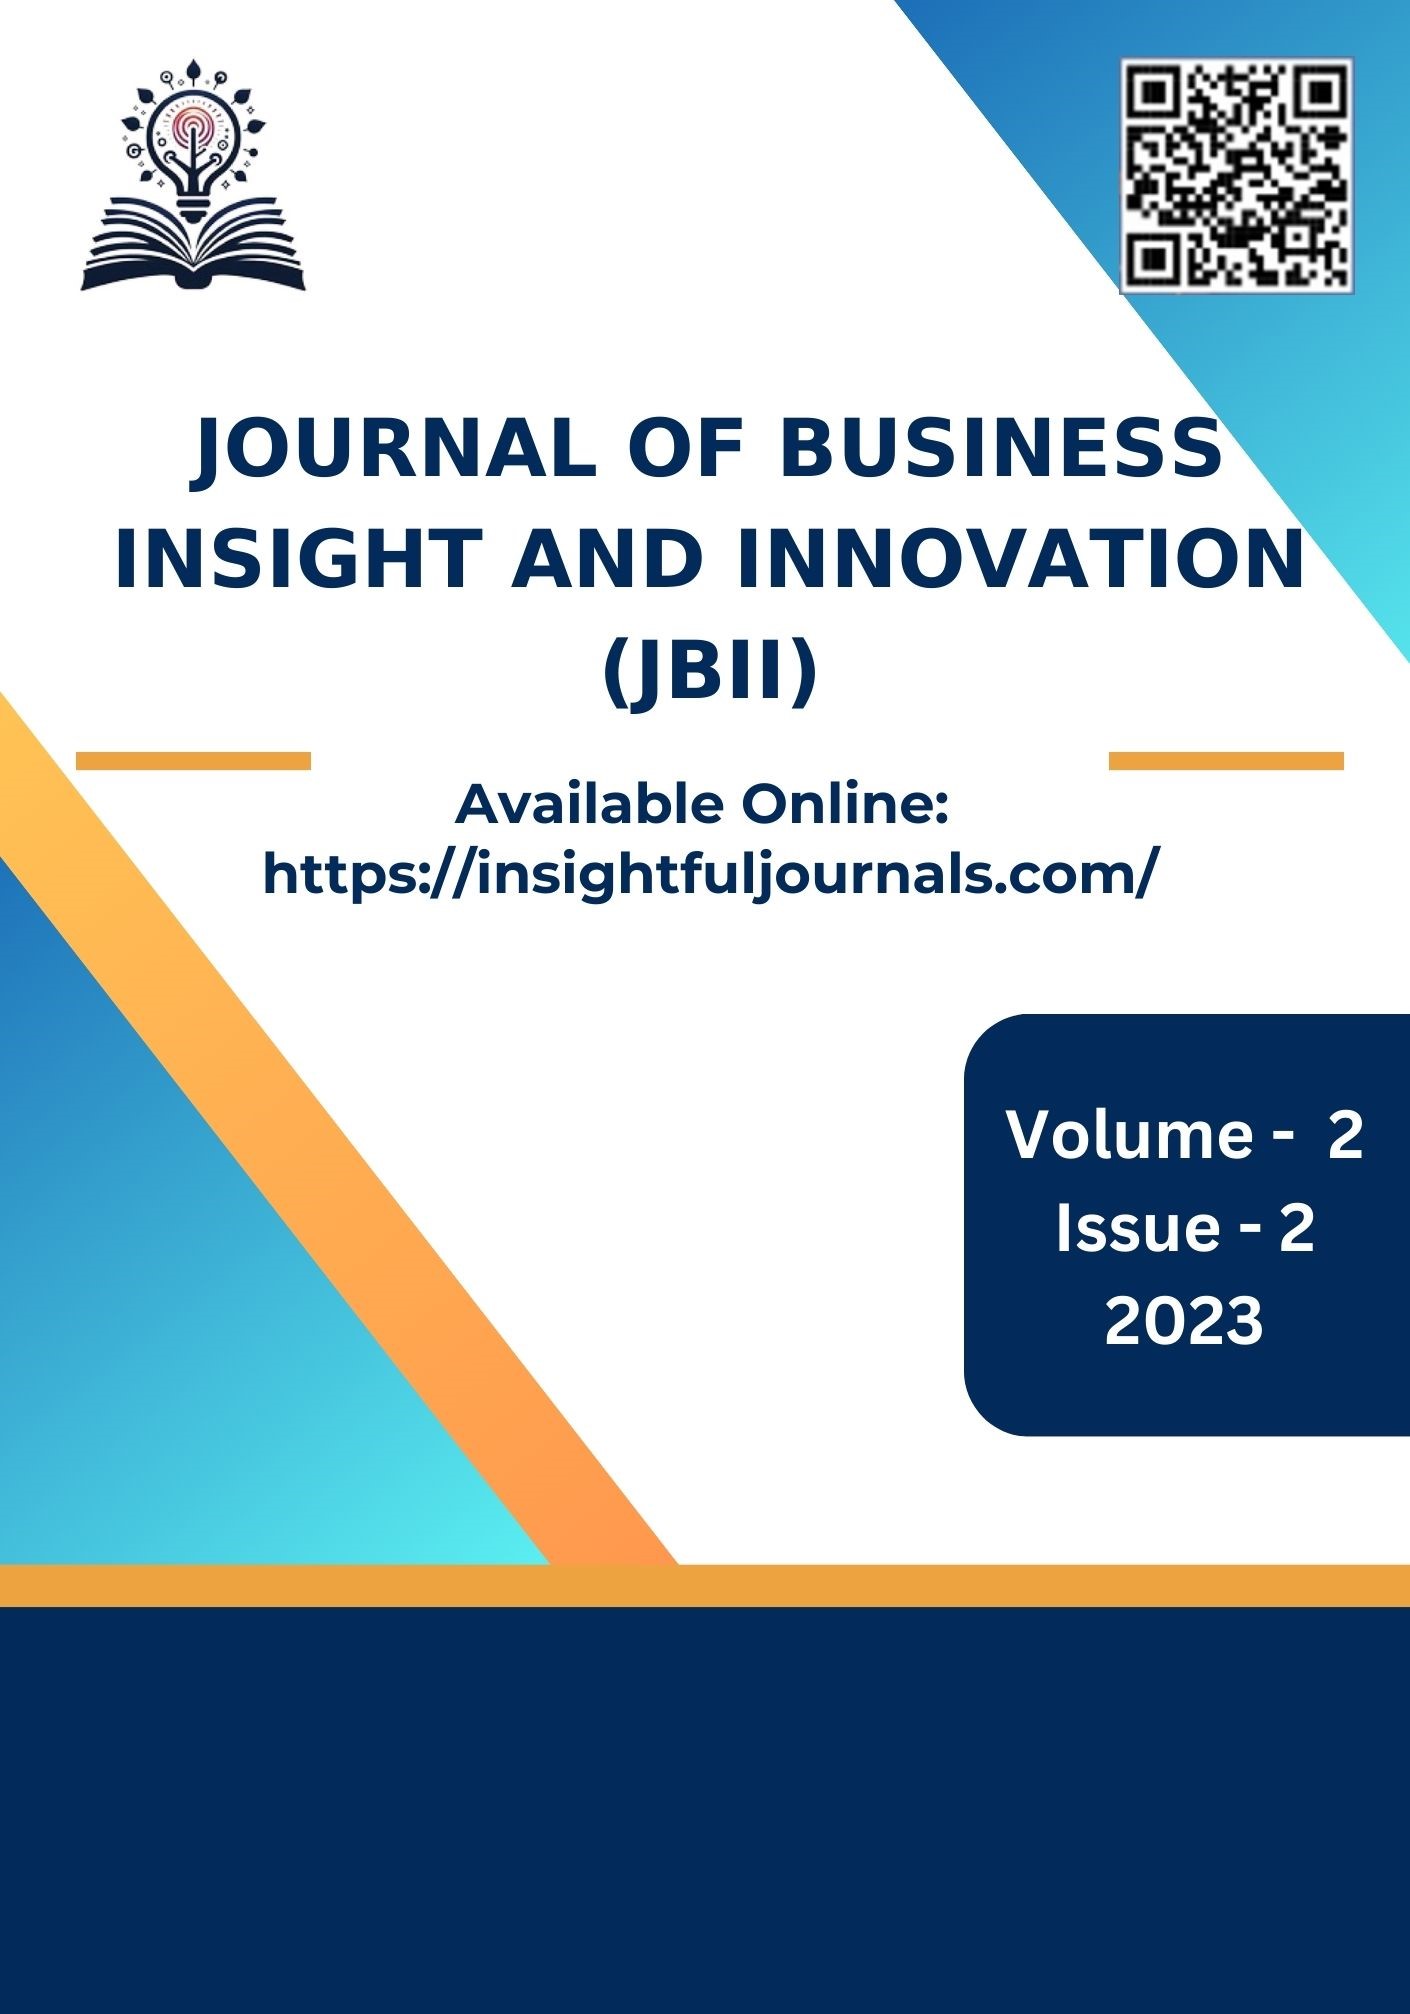 					View Vol. 2 No. 2 (2023): Journal of Business Insight and Innovation
				